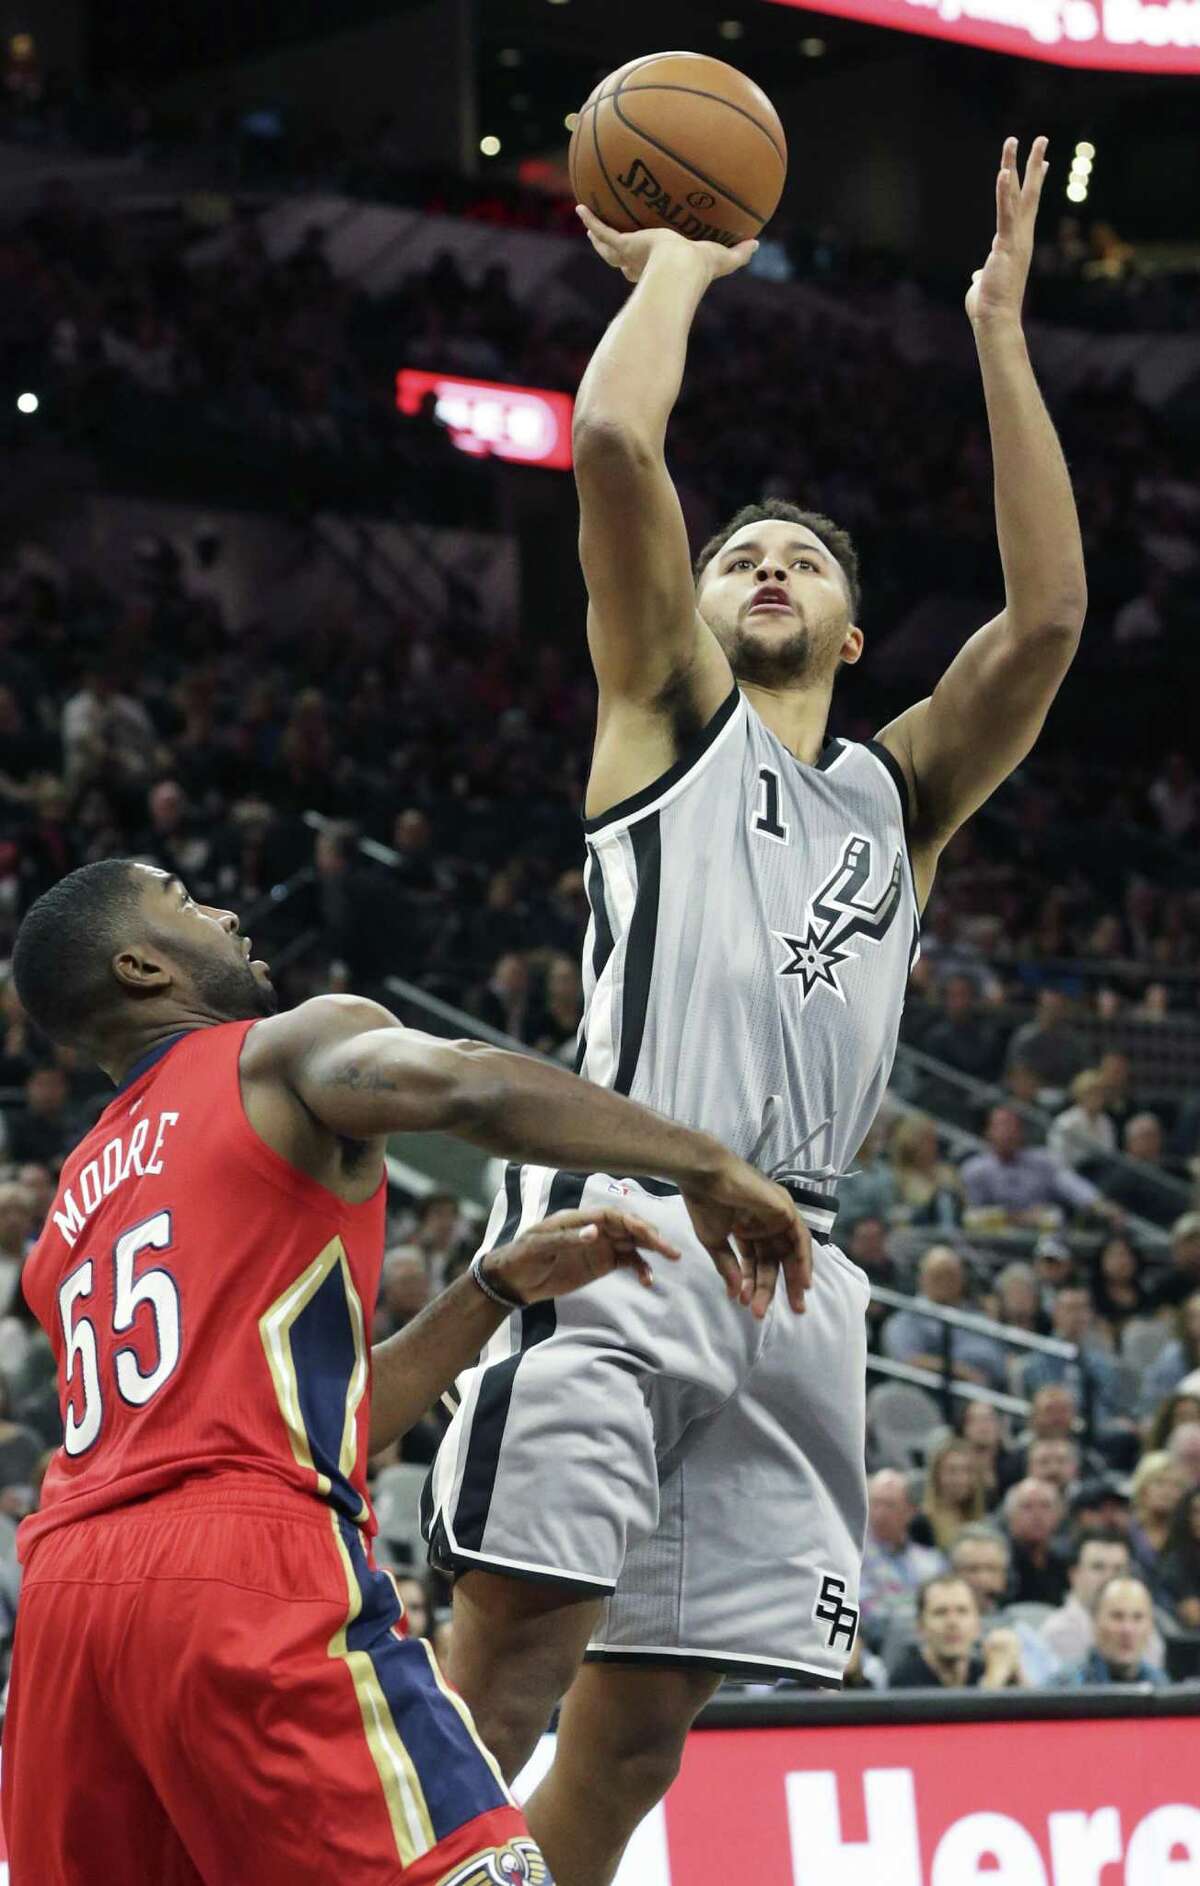 Kyle Anderson leans away for a shot over E'twain Moore as the Spurs host the Pelicans at the AT&T Center on October 29, 2016.